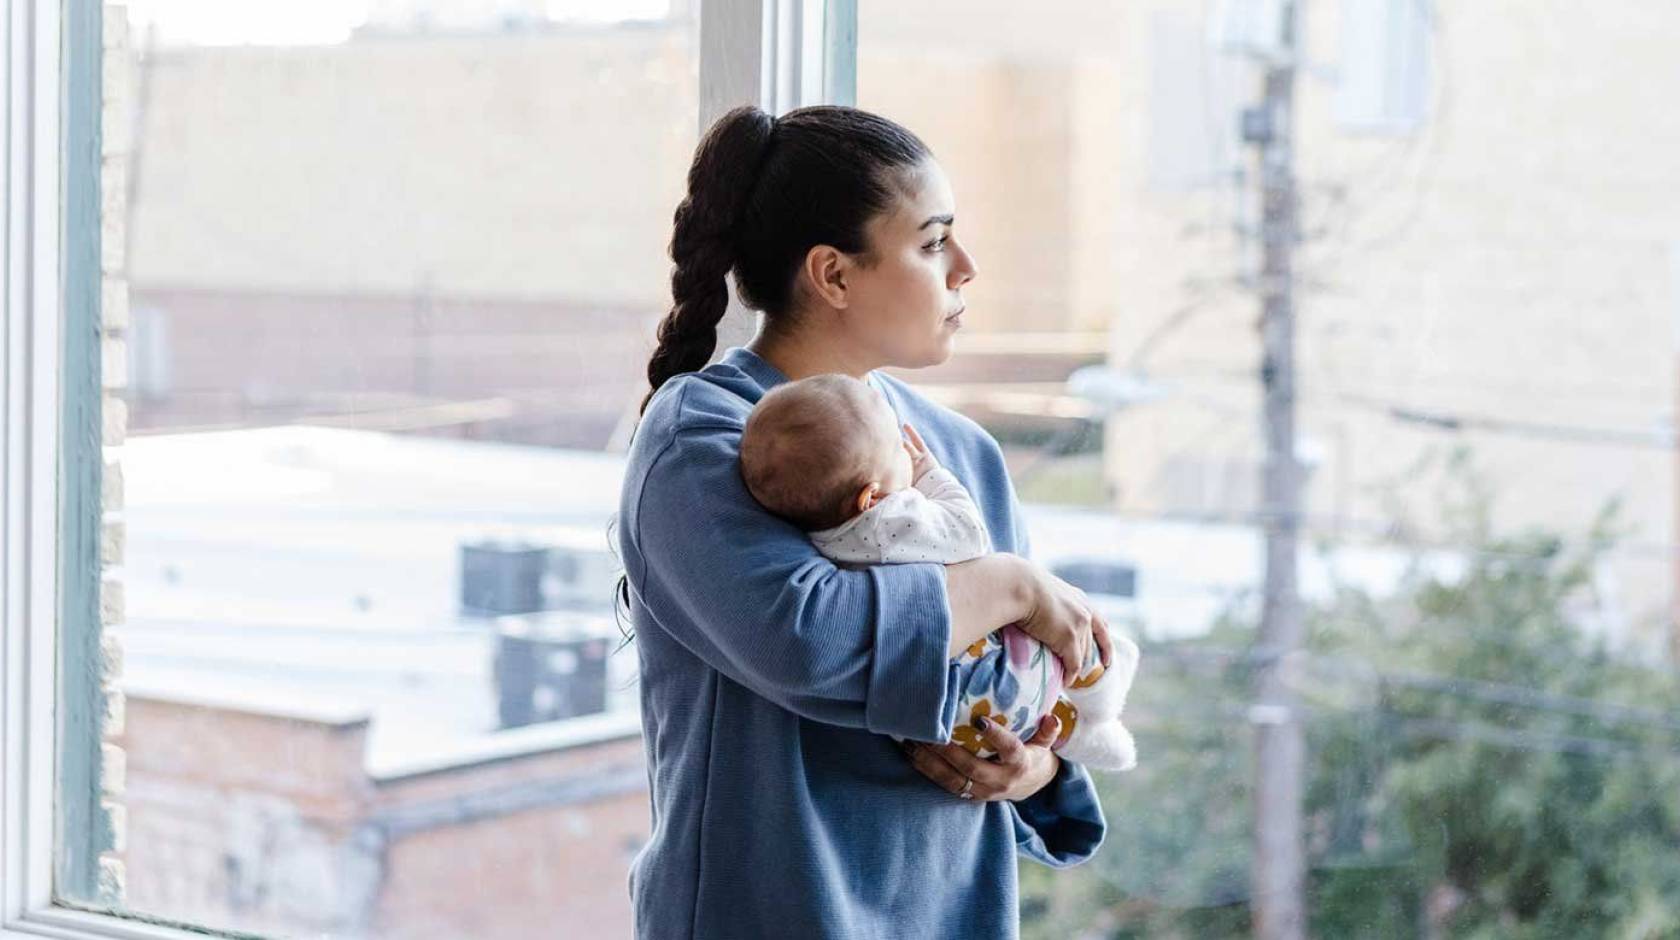 A woman with a long ponytail holds a baby and looks out the window with a trouble expression on her face